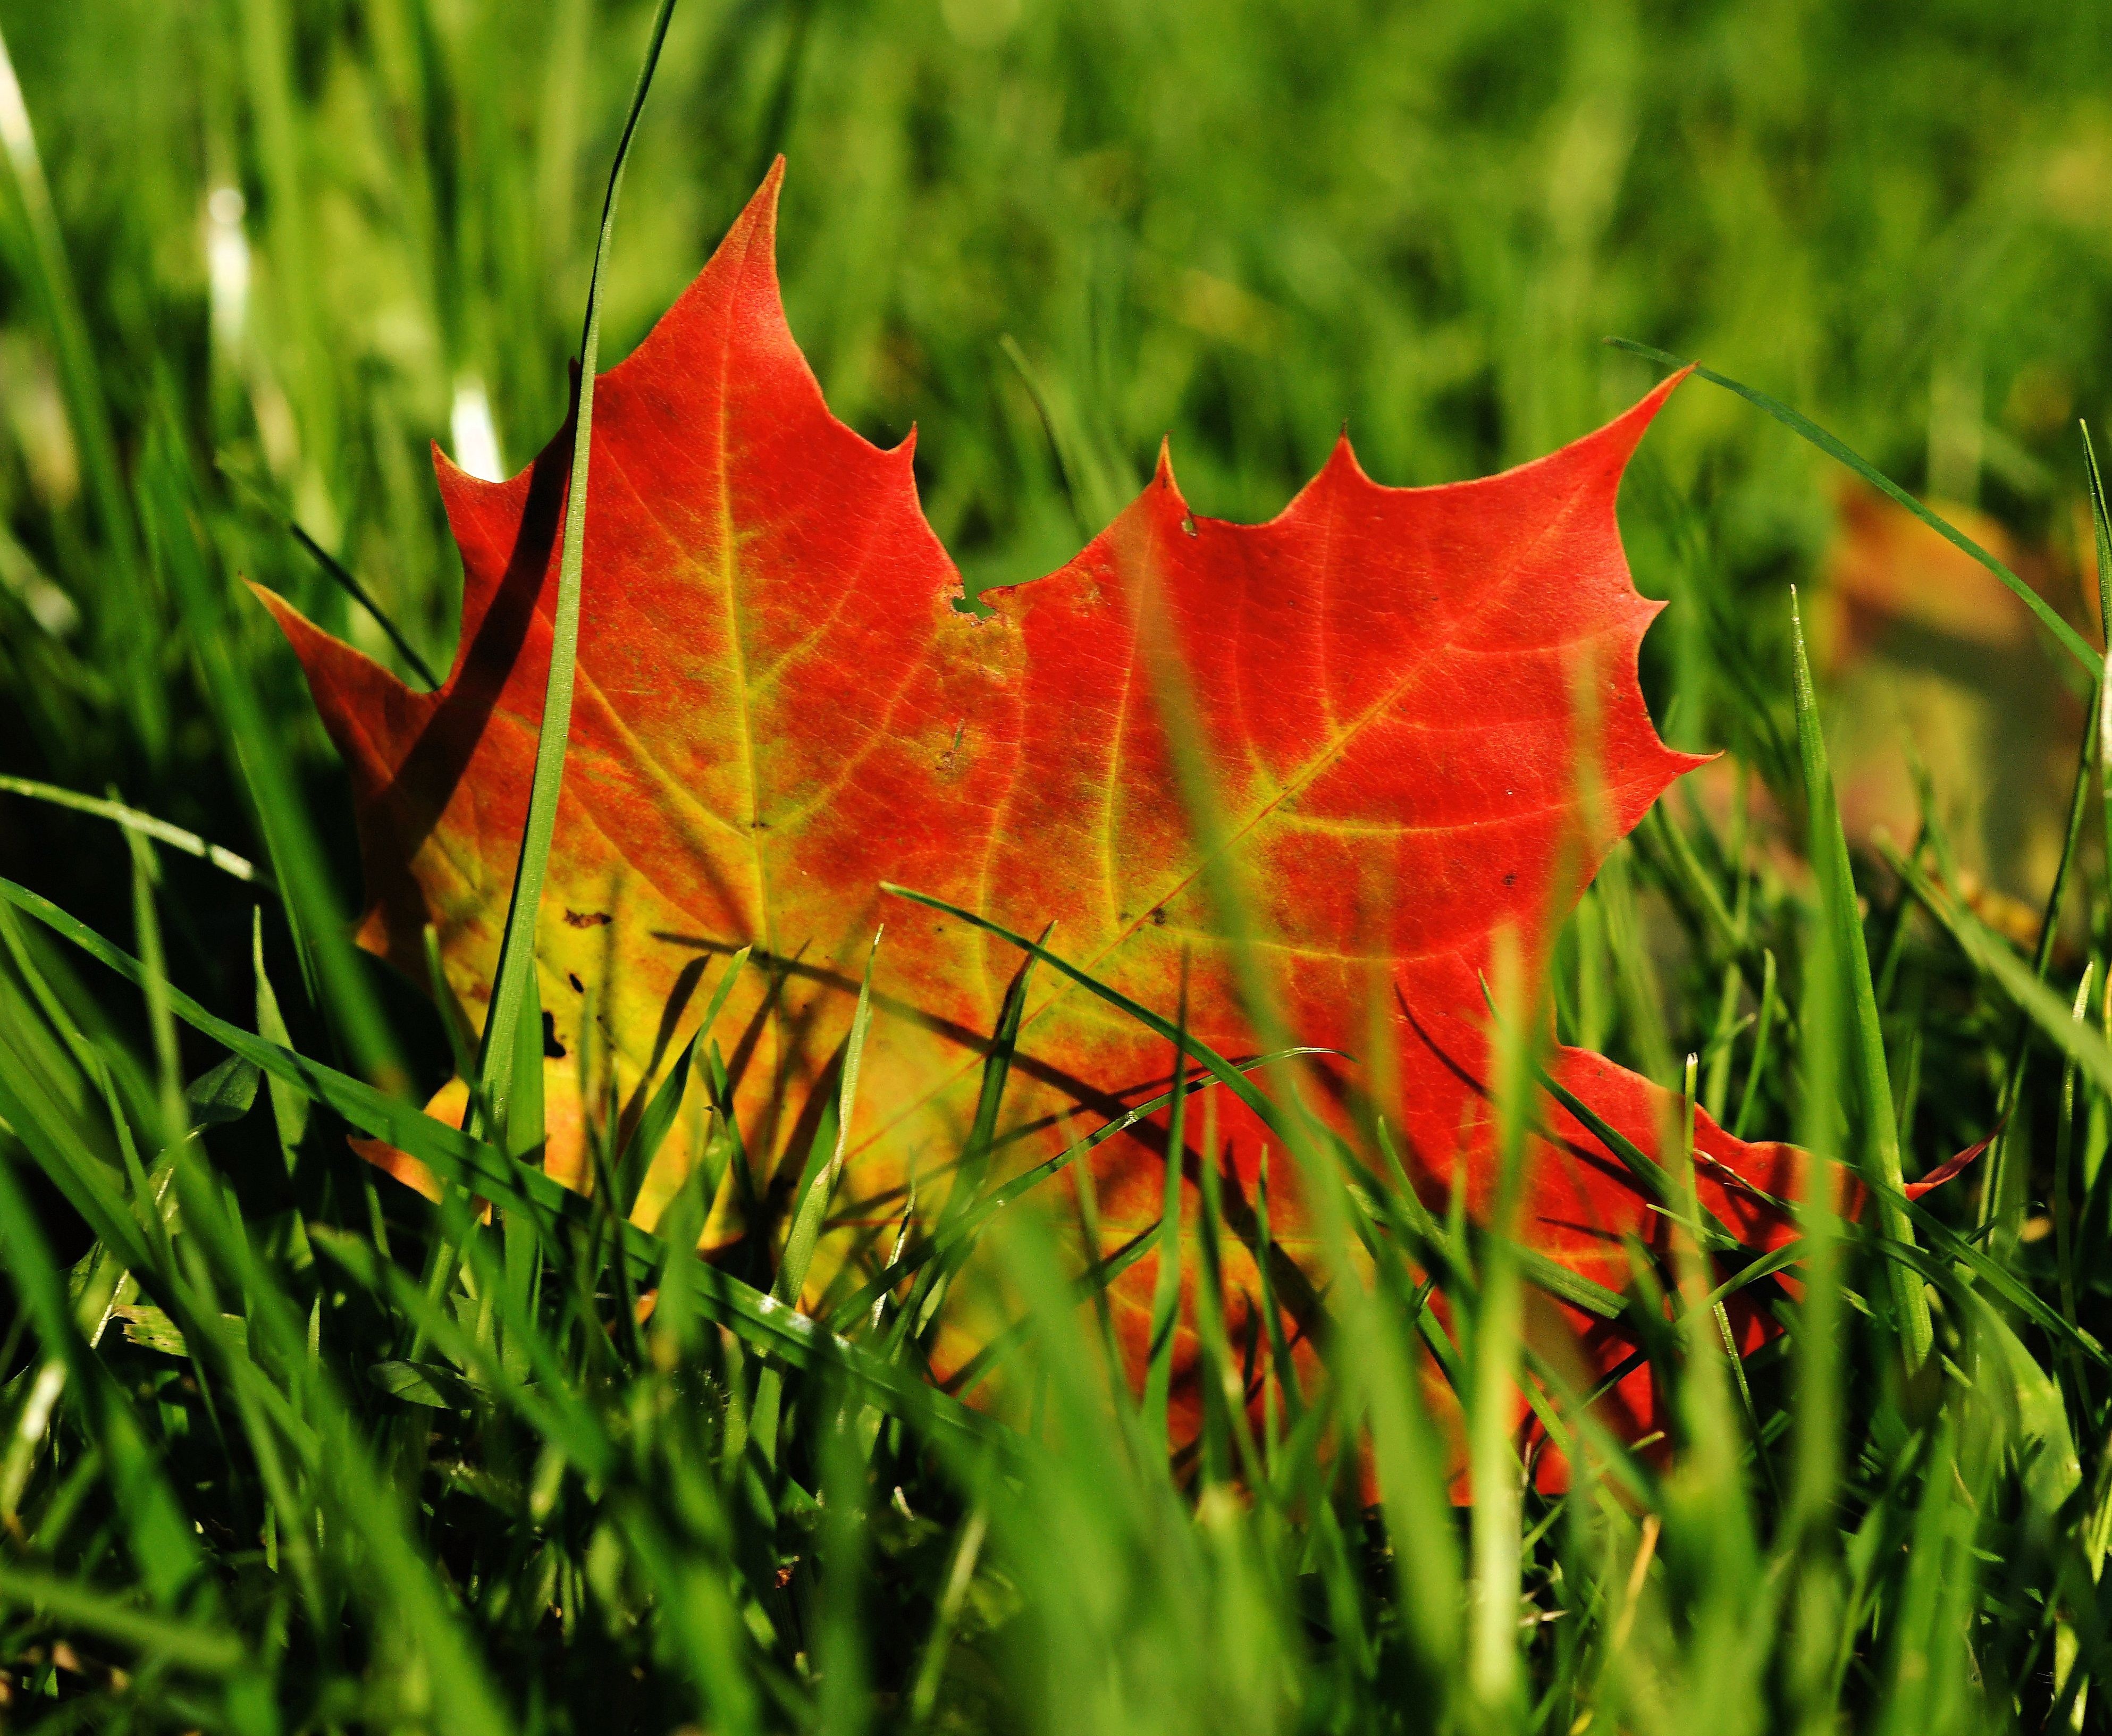 Free photo A fallen red leaf lies on the green lawn